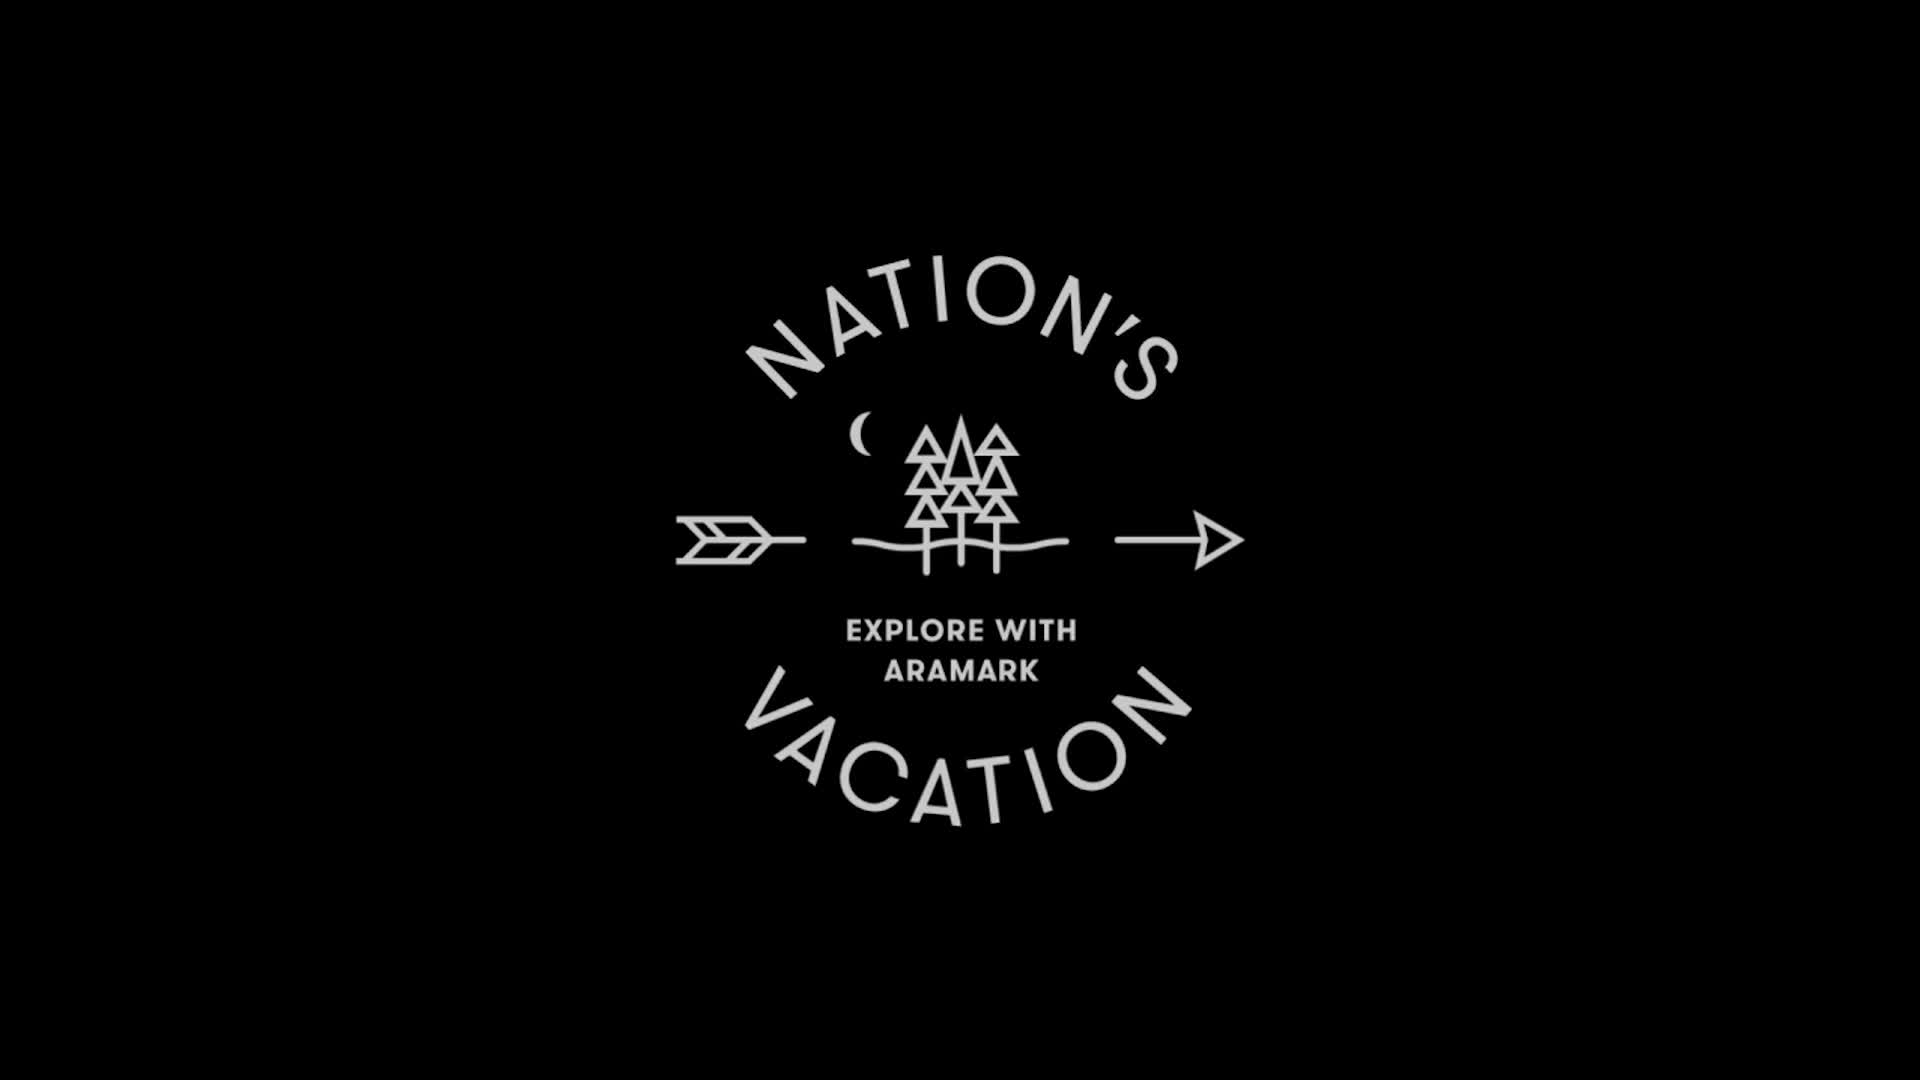 Nation's Vacation. Explore with Aramark